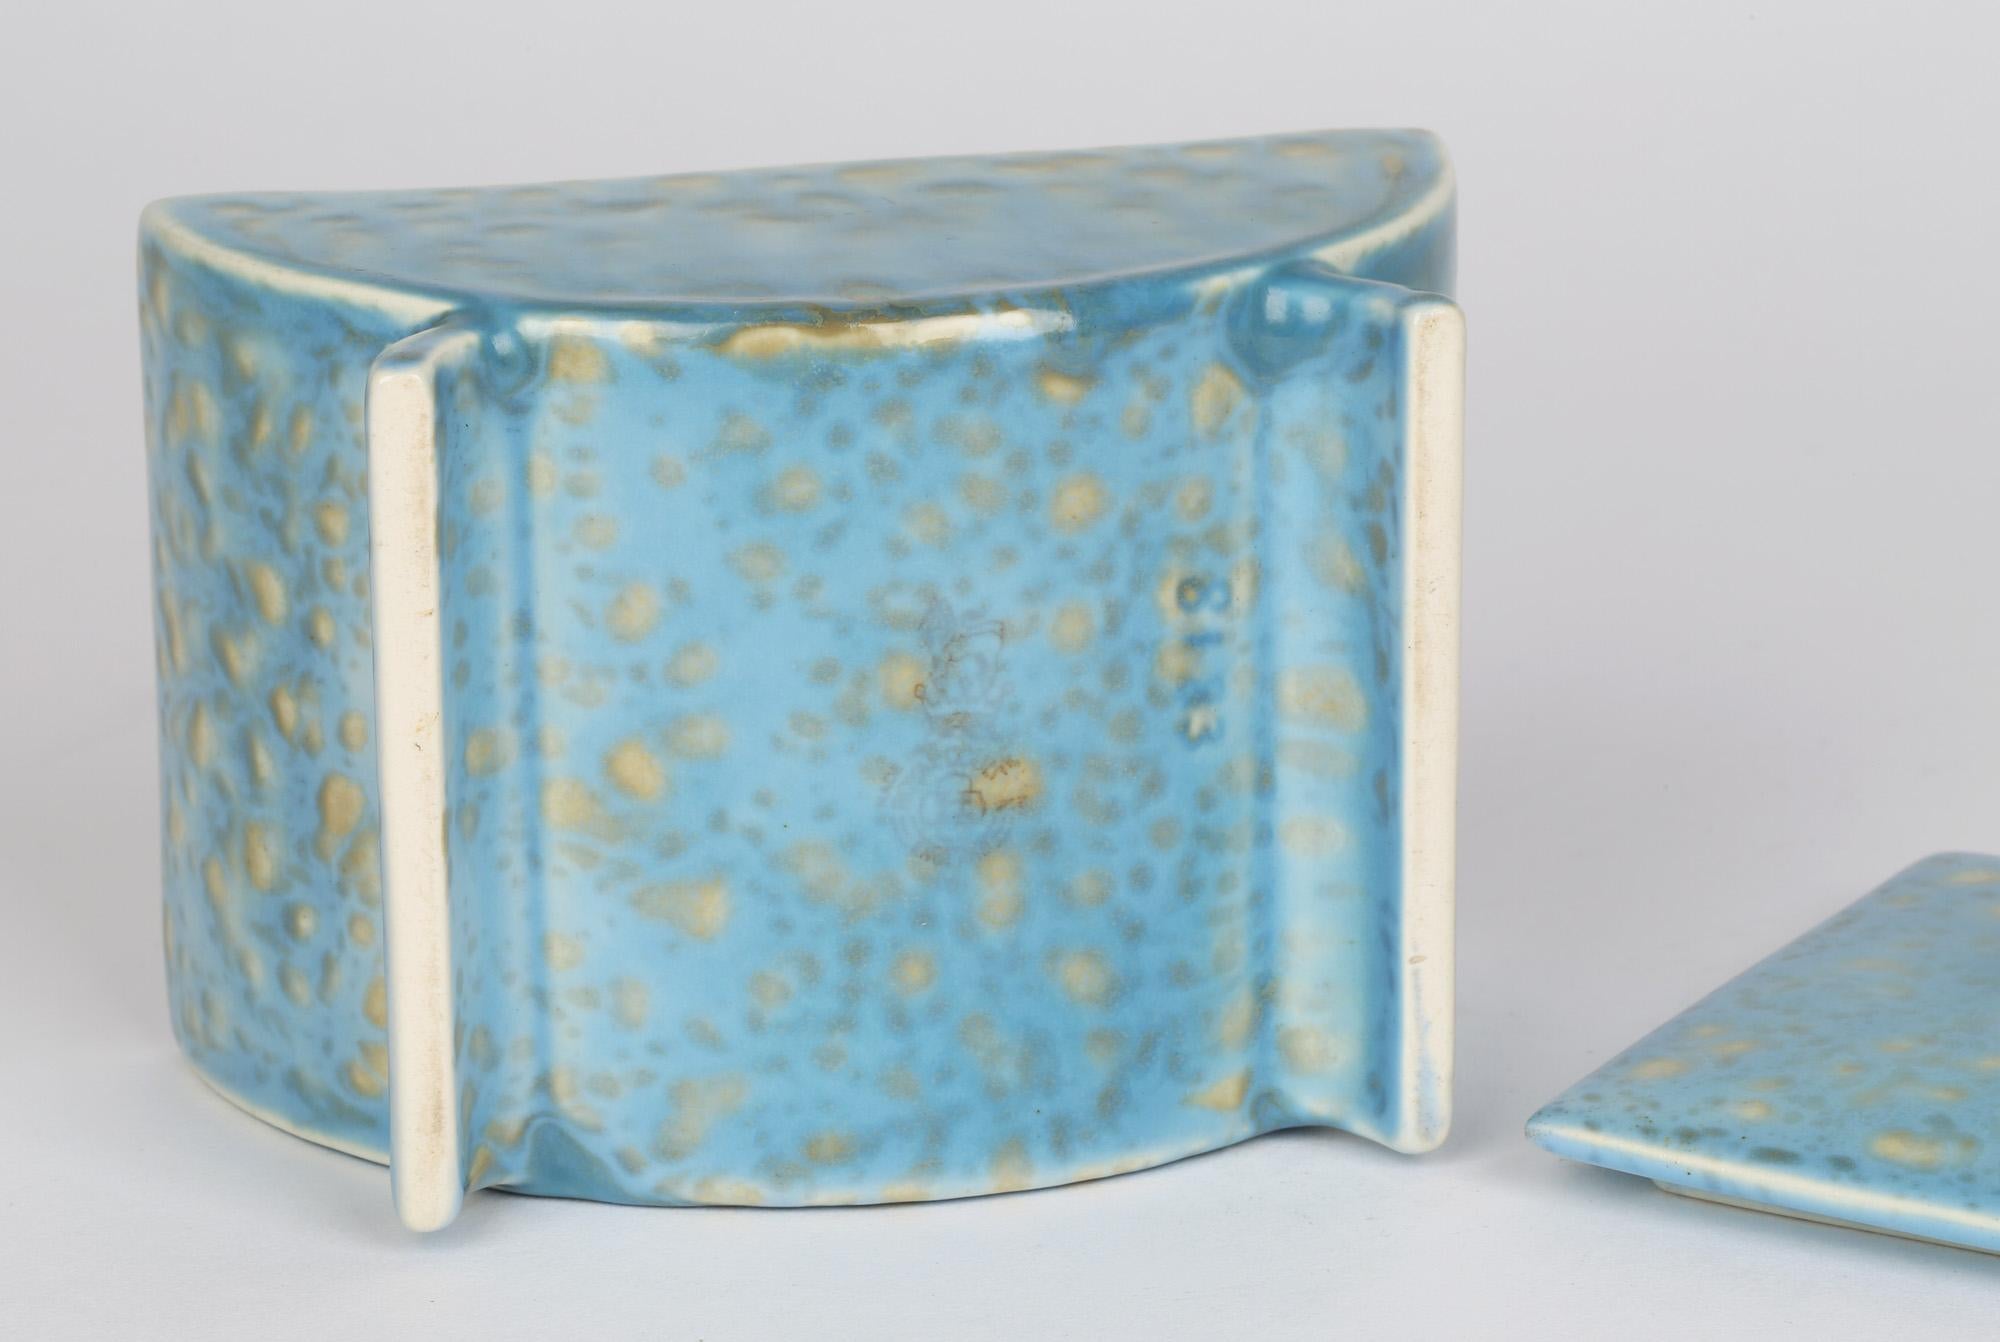 Unusual Royal Doulton Art Deco pottery playing card holder in mottled blue and yellow glazes dating from around 1925. The card holder is raised on two rounded legs with a rounded body and with a flat fitted cover with a handle molded with the